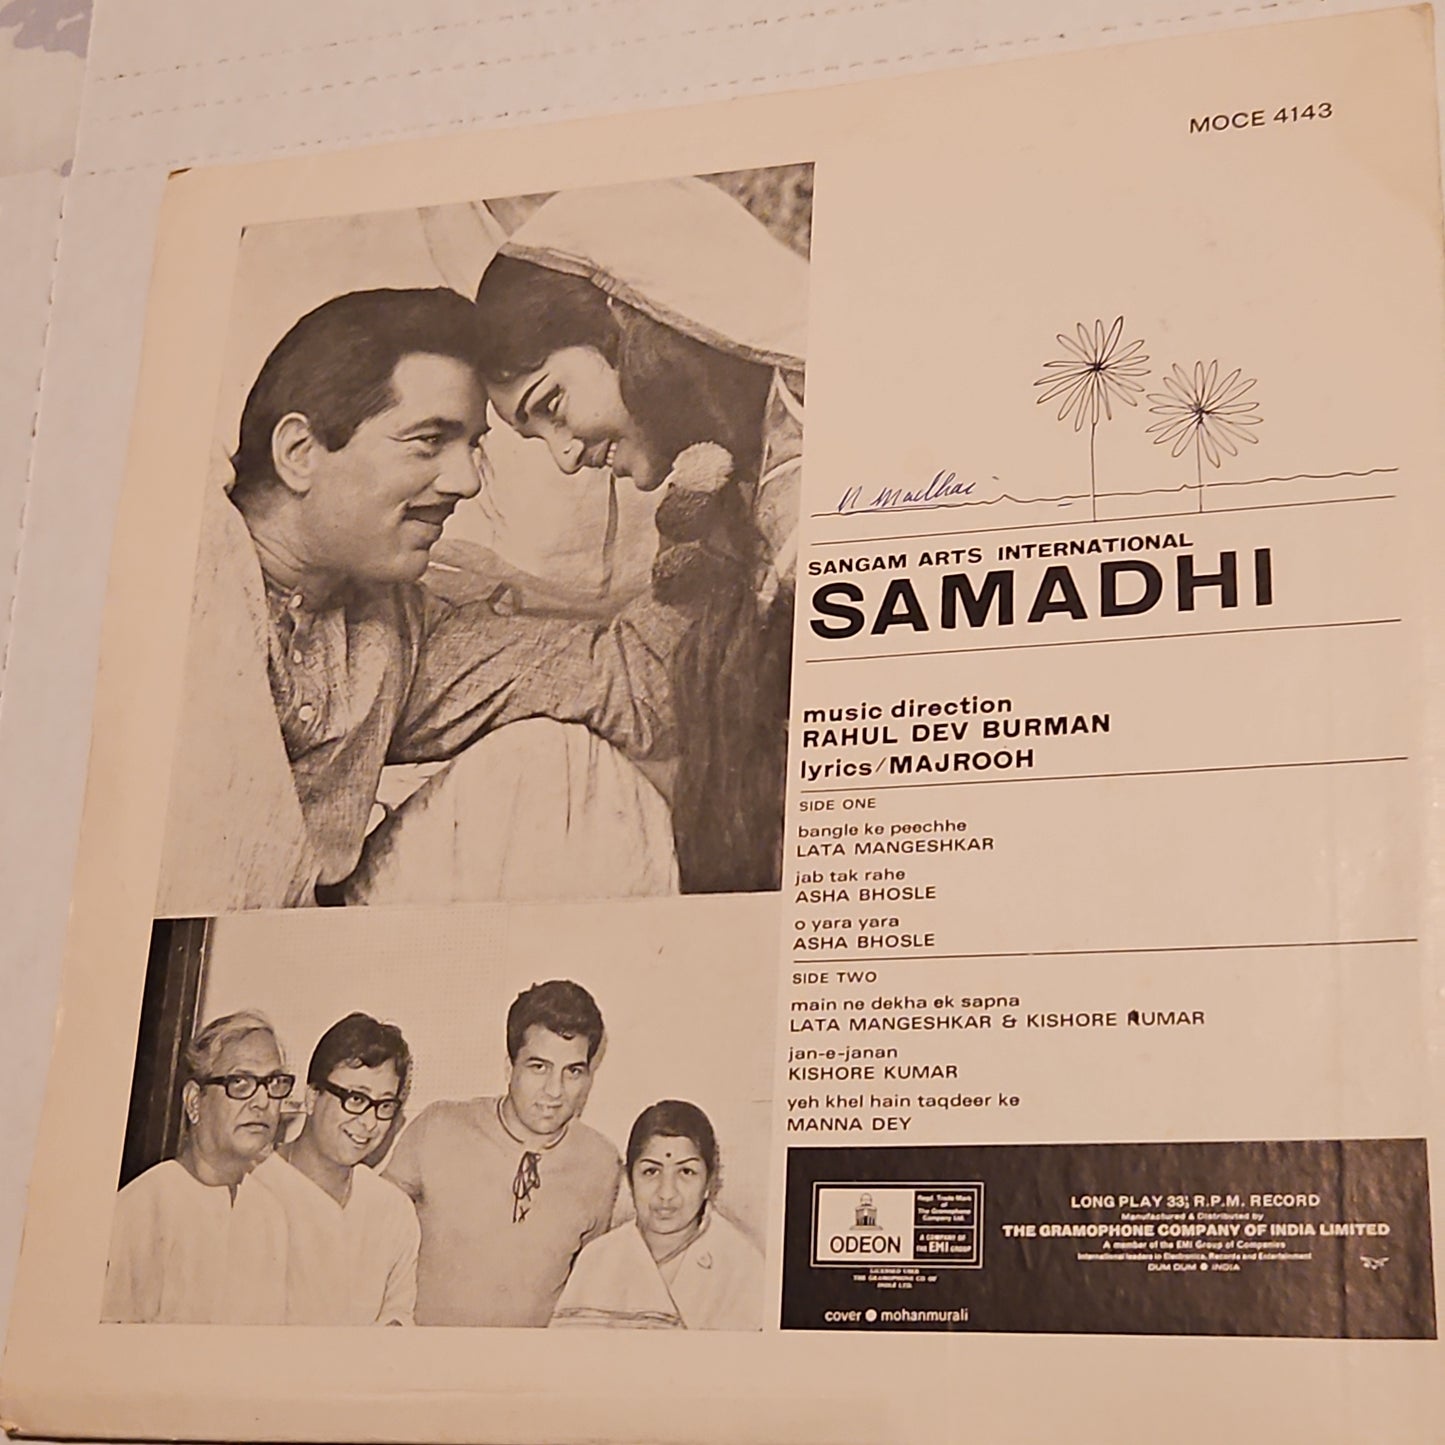 Samadhi - Music by R. D. Burman heavy Odeon in VG+ condition